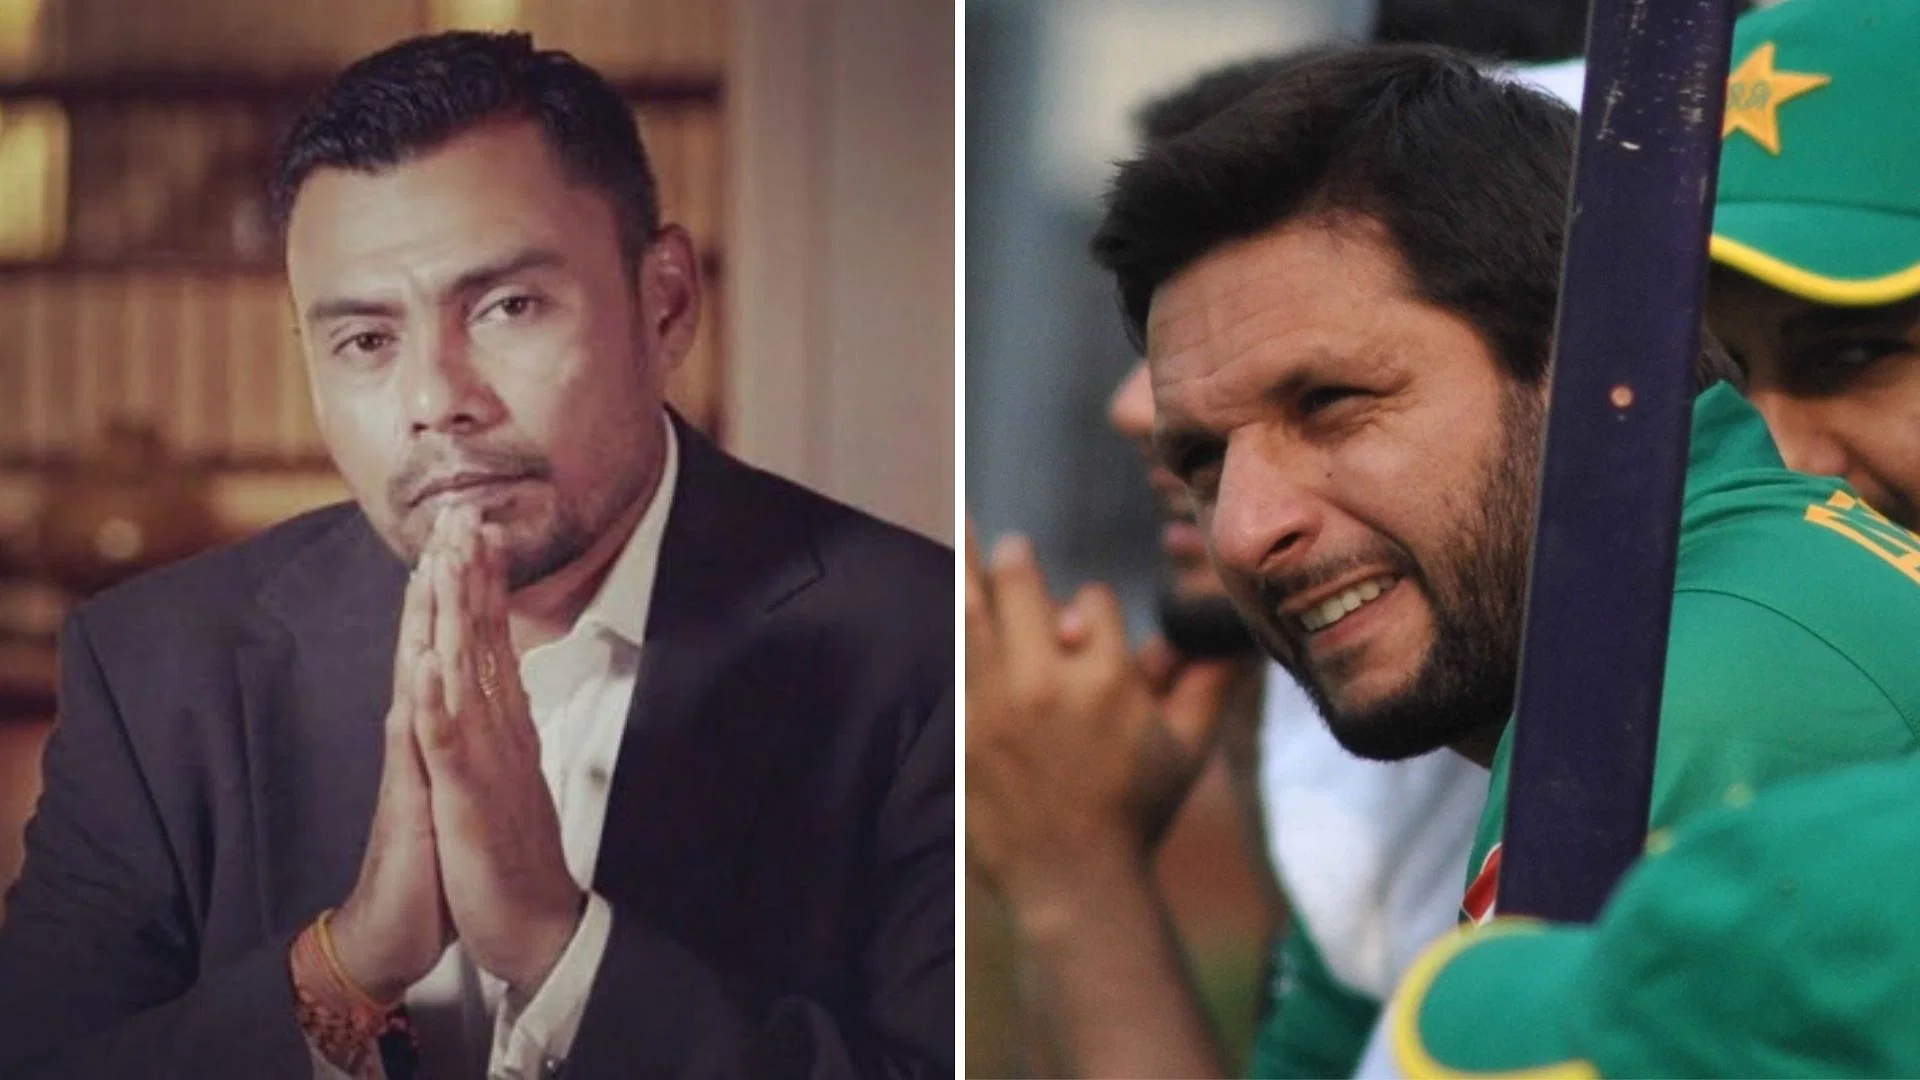 He didn't want me in the team...He was a liar and manipulator" - Danish Kaneria on Shahid Afridi